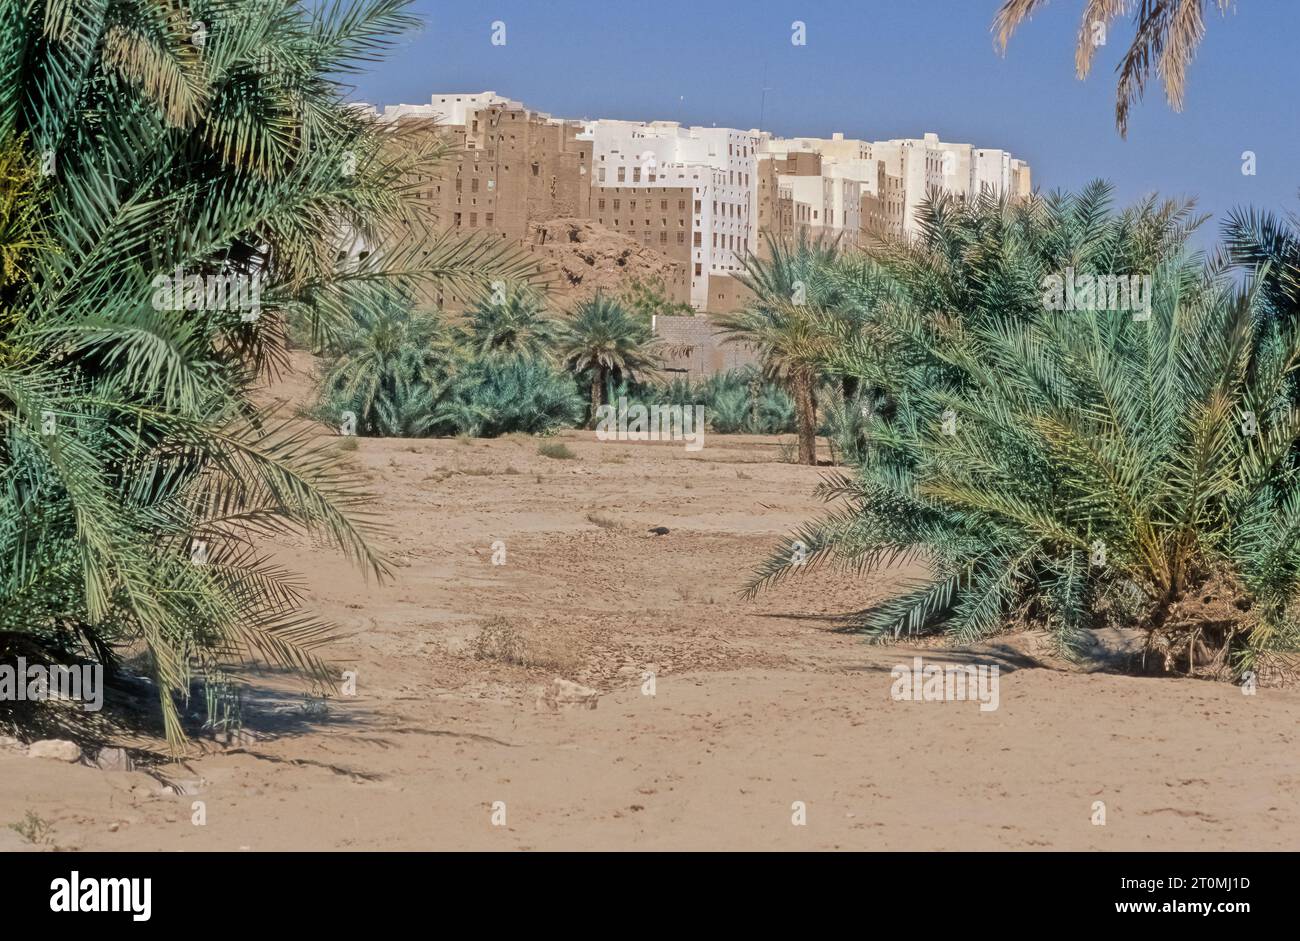 Shibam Hadramawt is a town in Yemen. With about 7,000 inhabitants, it is the seat of the District of Shibam in the Governorate of Hadhramaut. Stock Photo